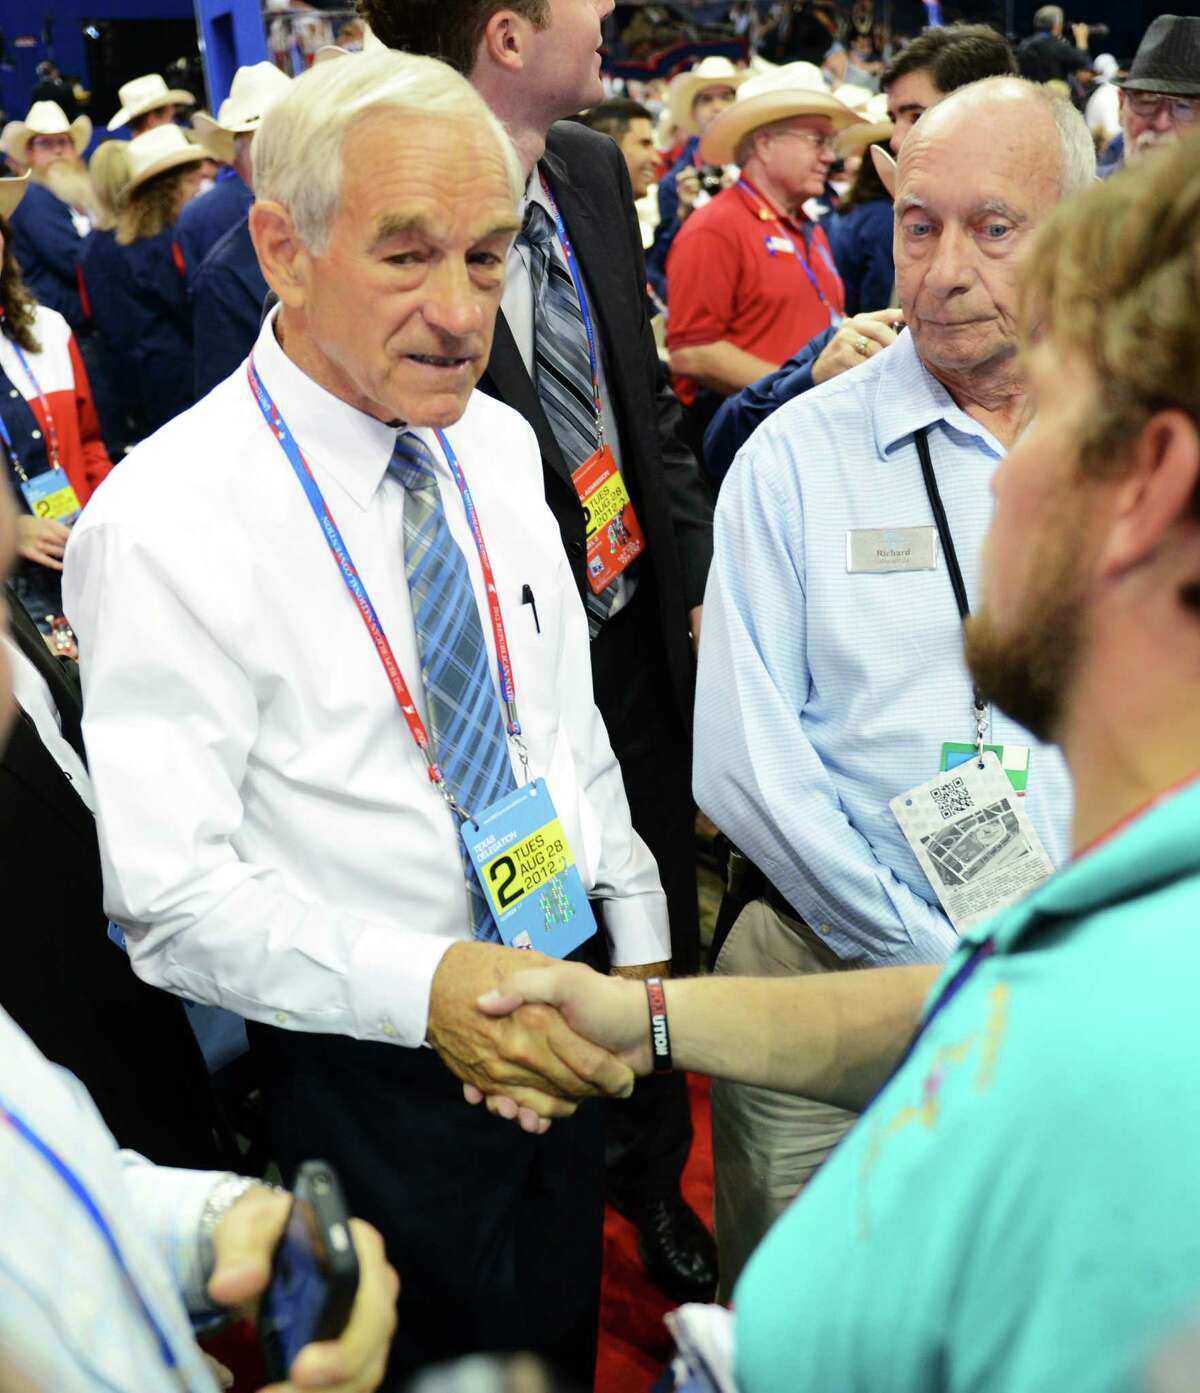 Rep. Ron Paul (R-TX/14) greets convention attendees at the second session of the 2012 Republican National Convention at the Tampa Bay Times Forum in Tampa, Tuesday, August 28, 2012. (Lionel Hahn/Abaca Press/MCT)